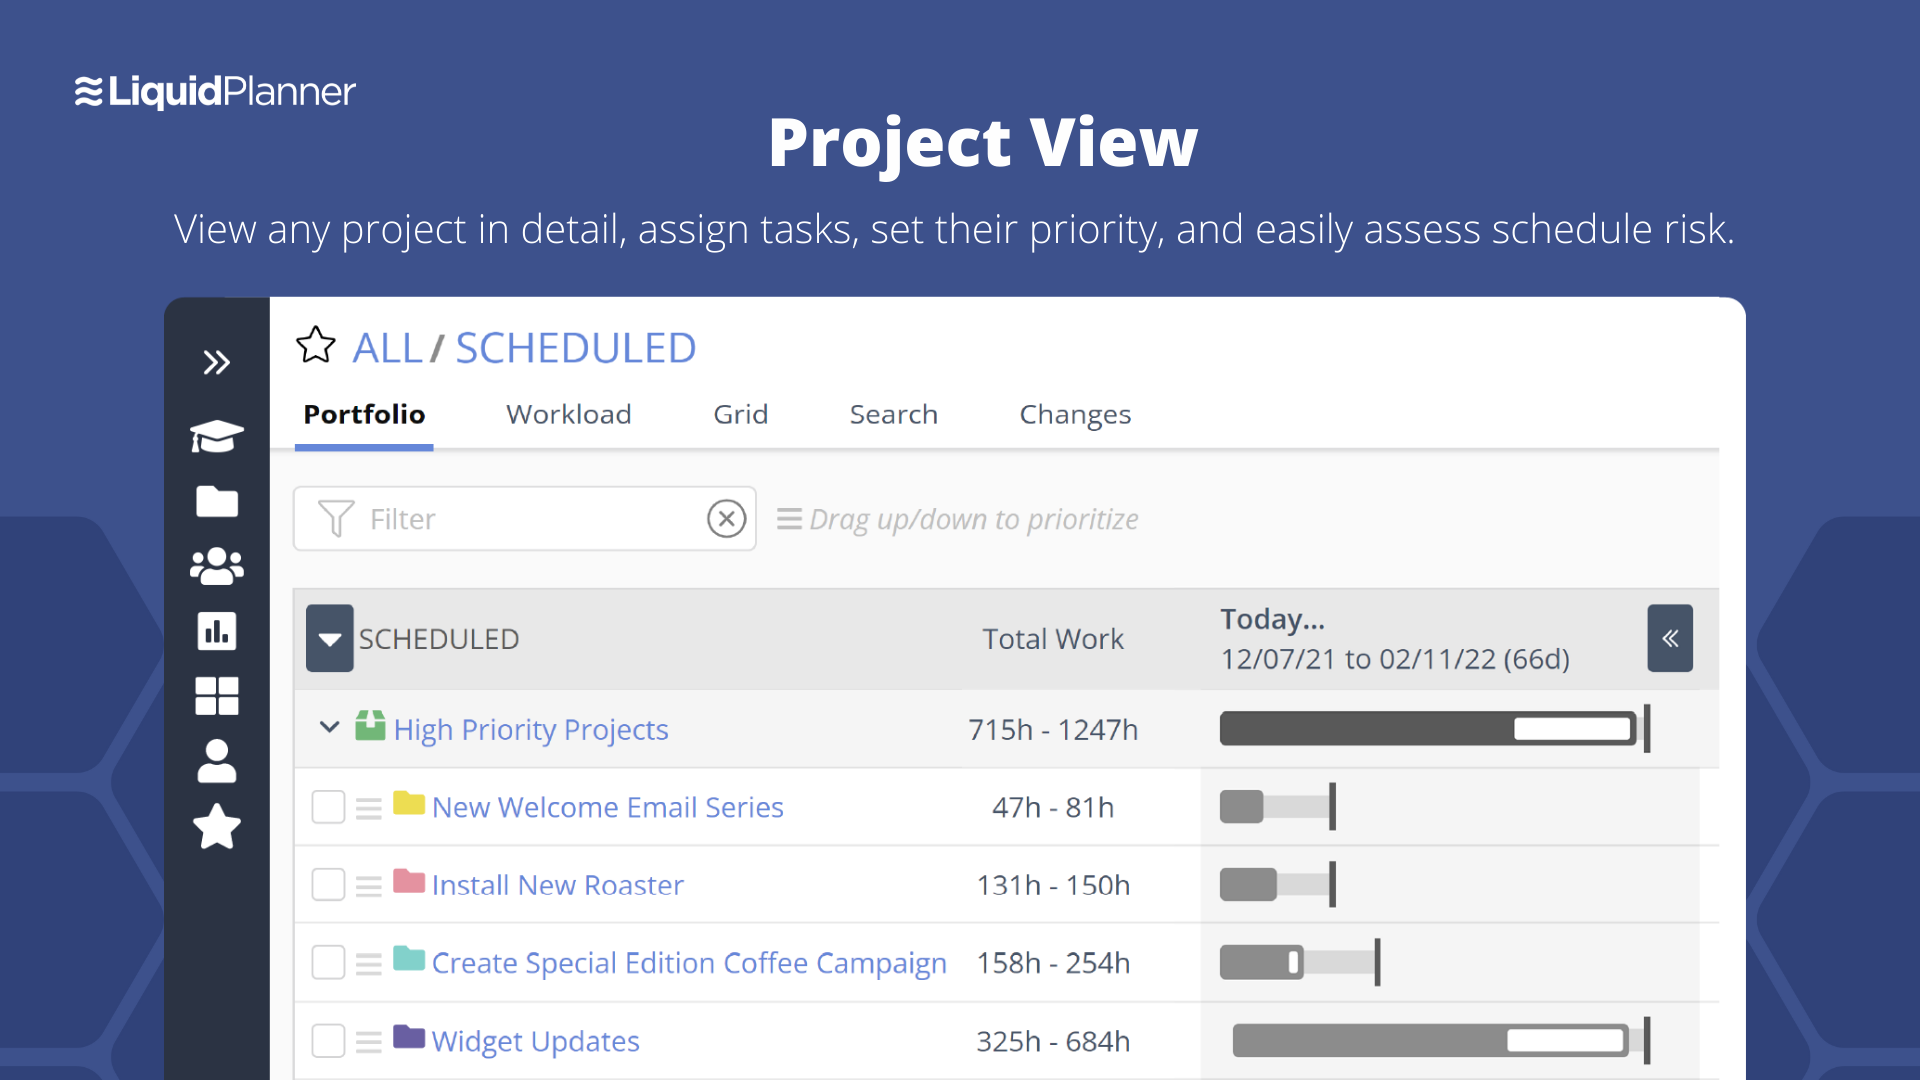 LiquidPlanner - Project View allows you to view any project in detail, assign tasks, set their priority, and easily access schedule risk.